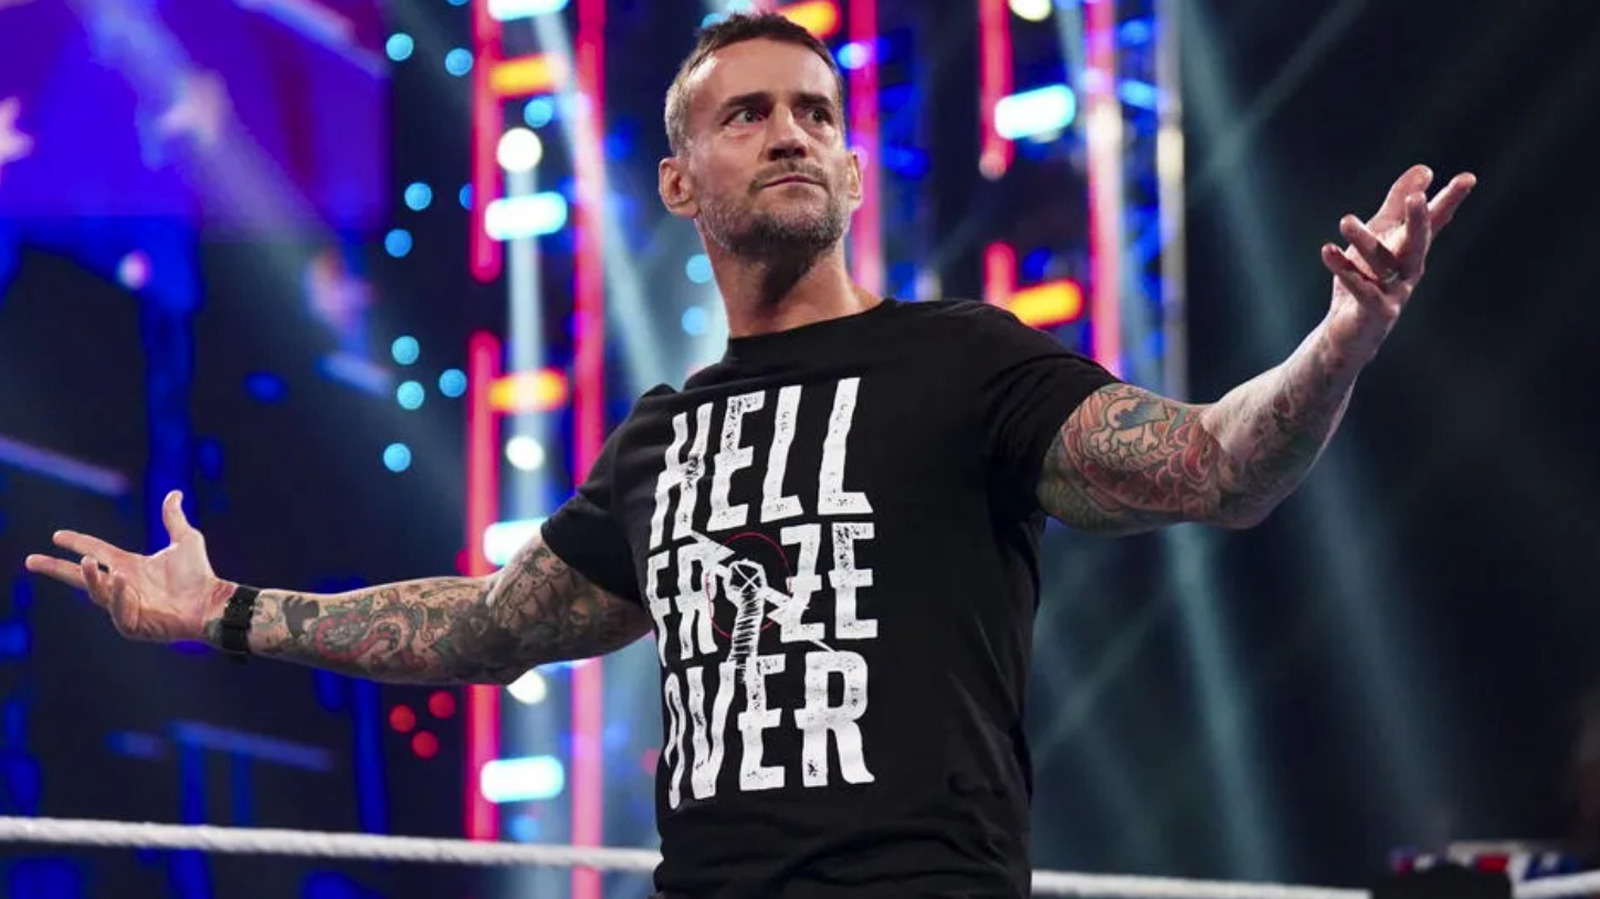 Ace Steel Looks Forward To CM Punk WWE Comeback Story: 'He Now Has A Dragon To Slay'